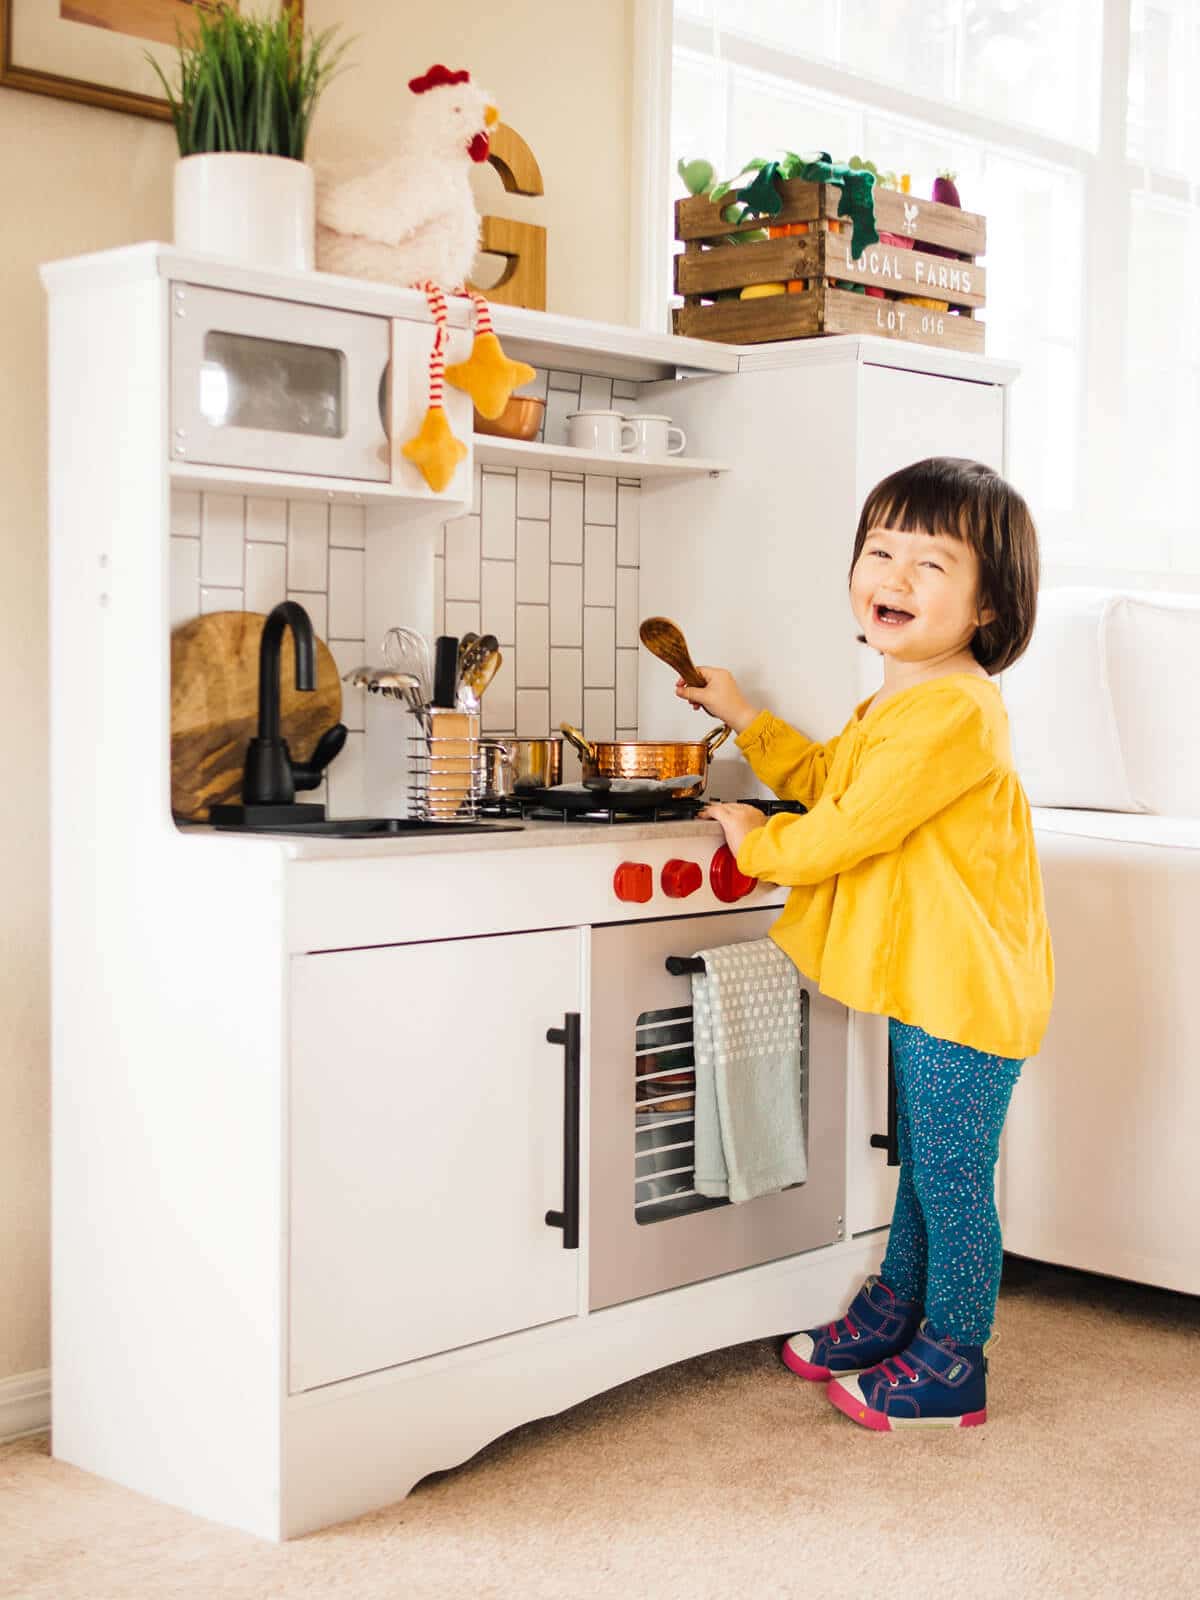 Cooking in her remodeled KidKraft play kitchen